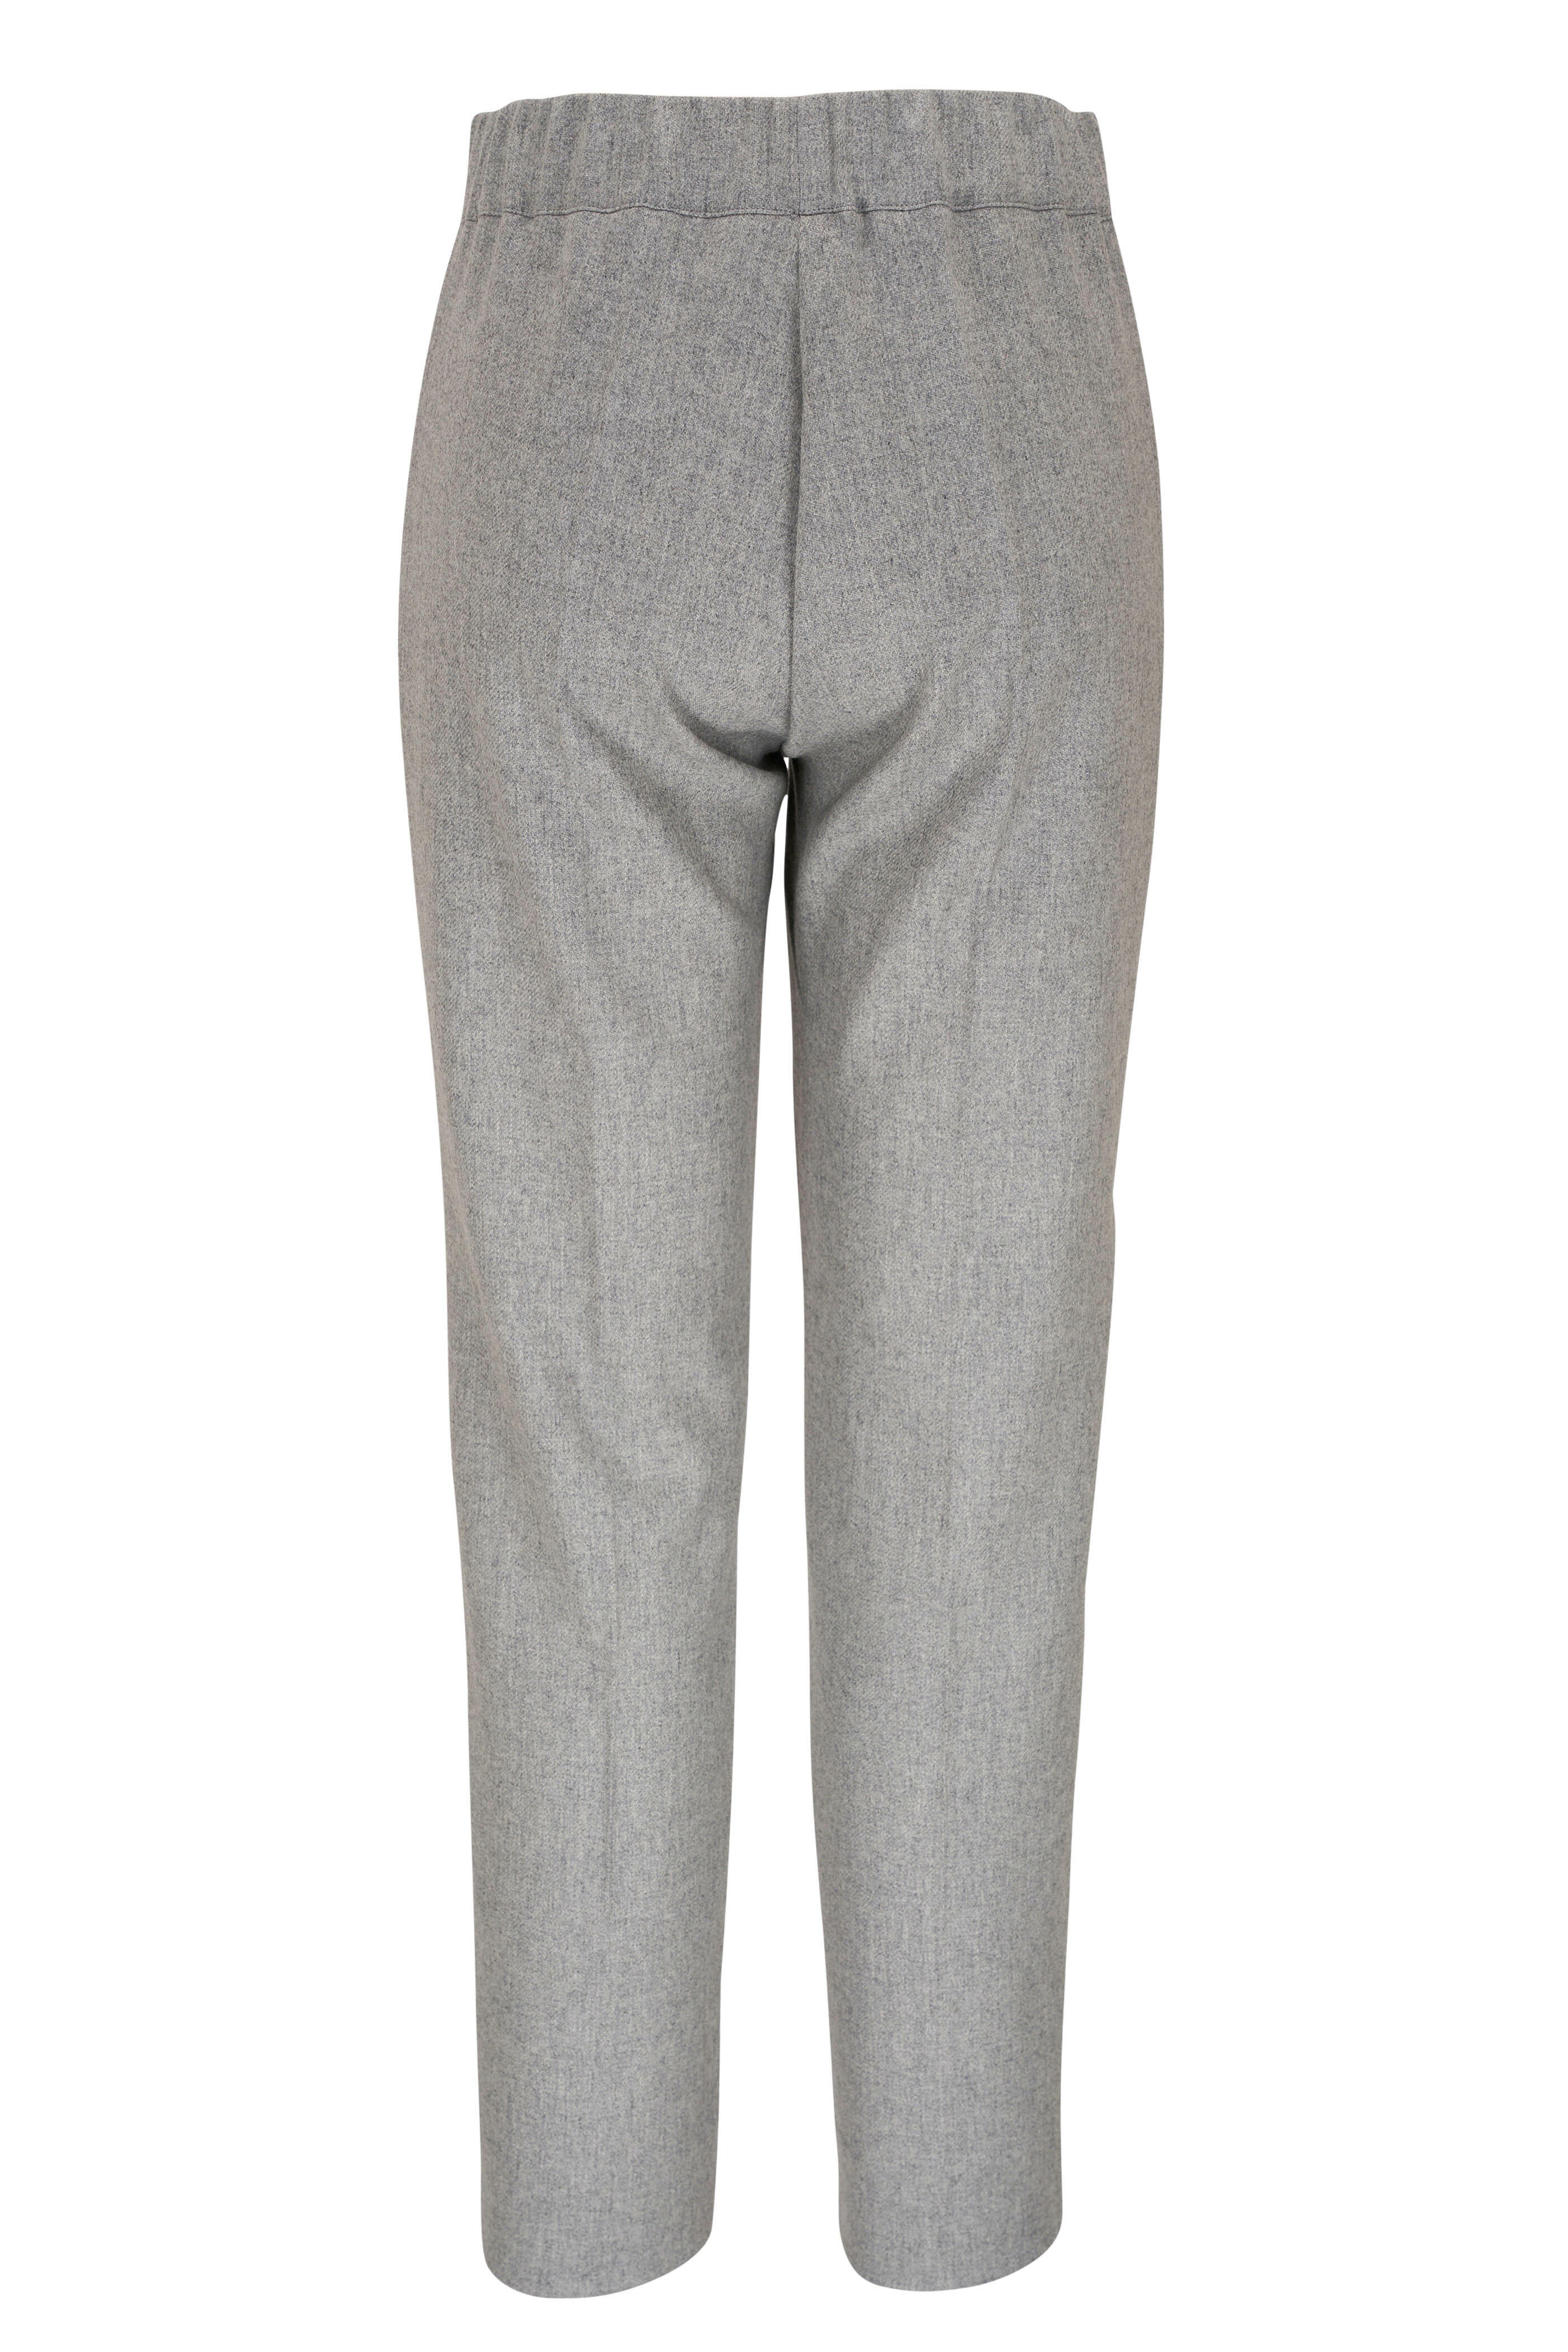 D.Exterior - Granite Pull-On Classic Slim Pant | Mitchell Stores